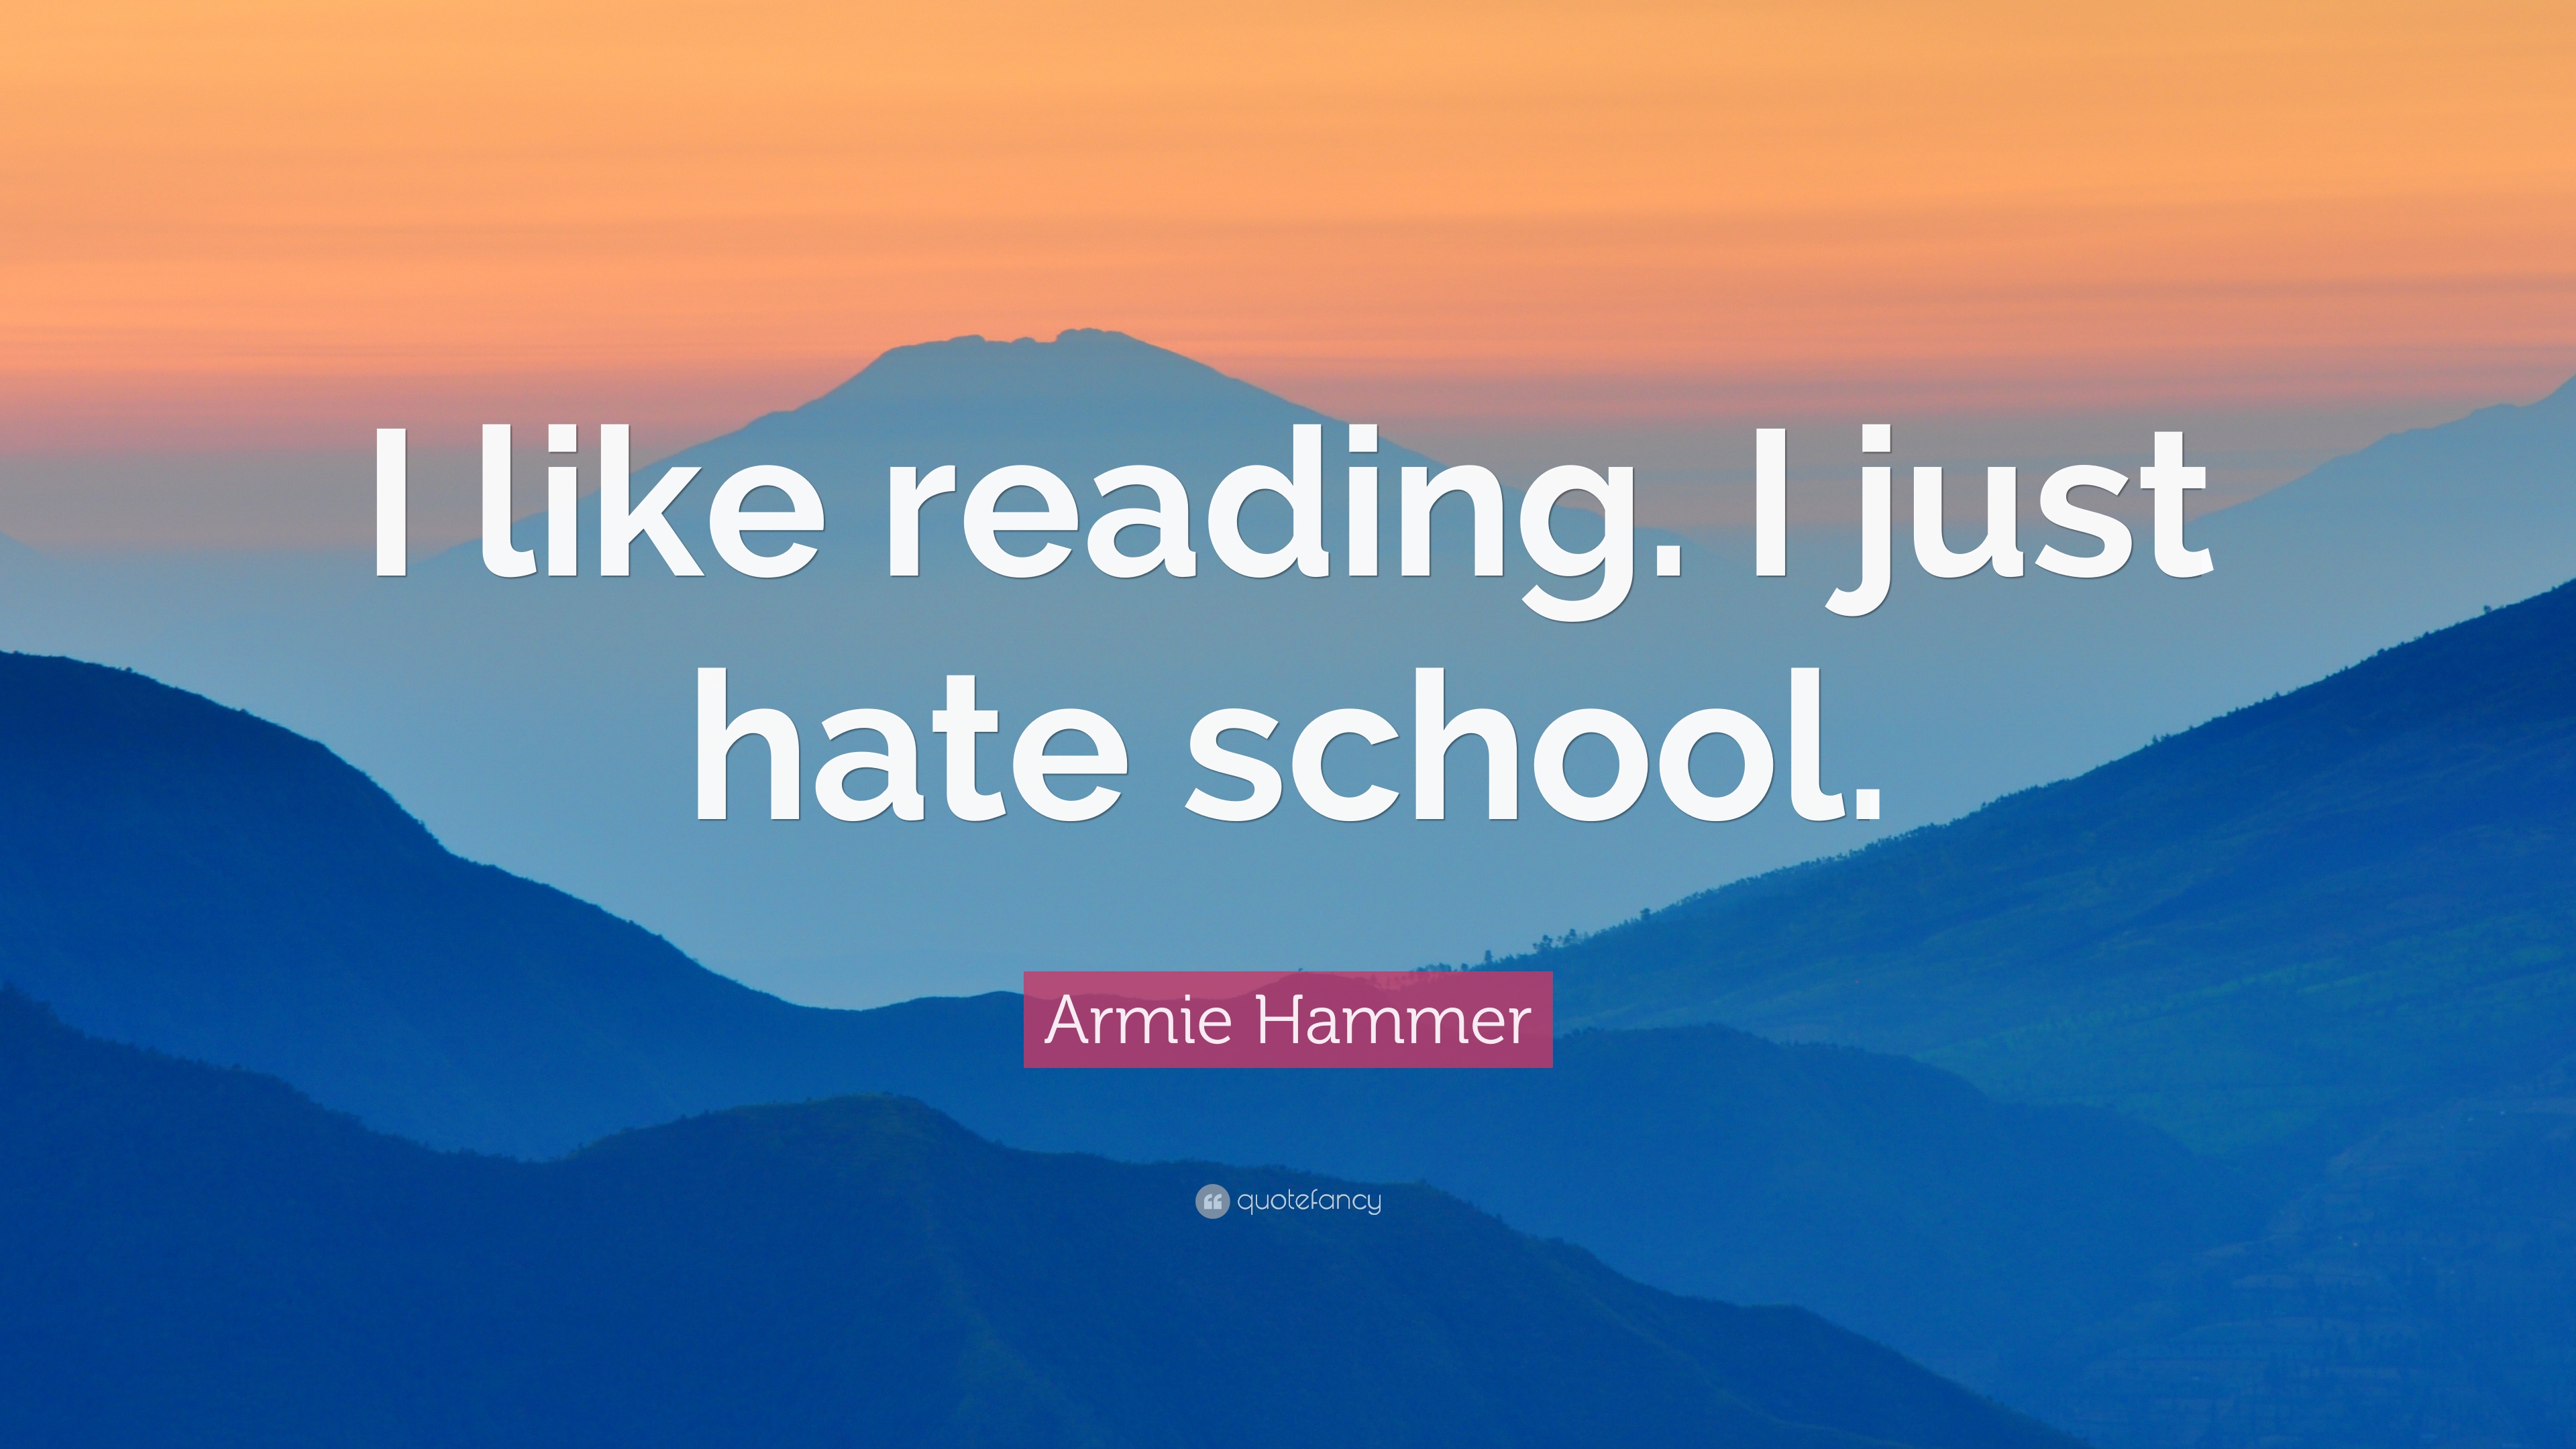 Armie Hammer Quote: “I like reading. I just hate school